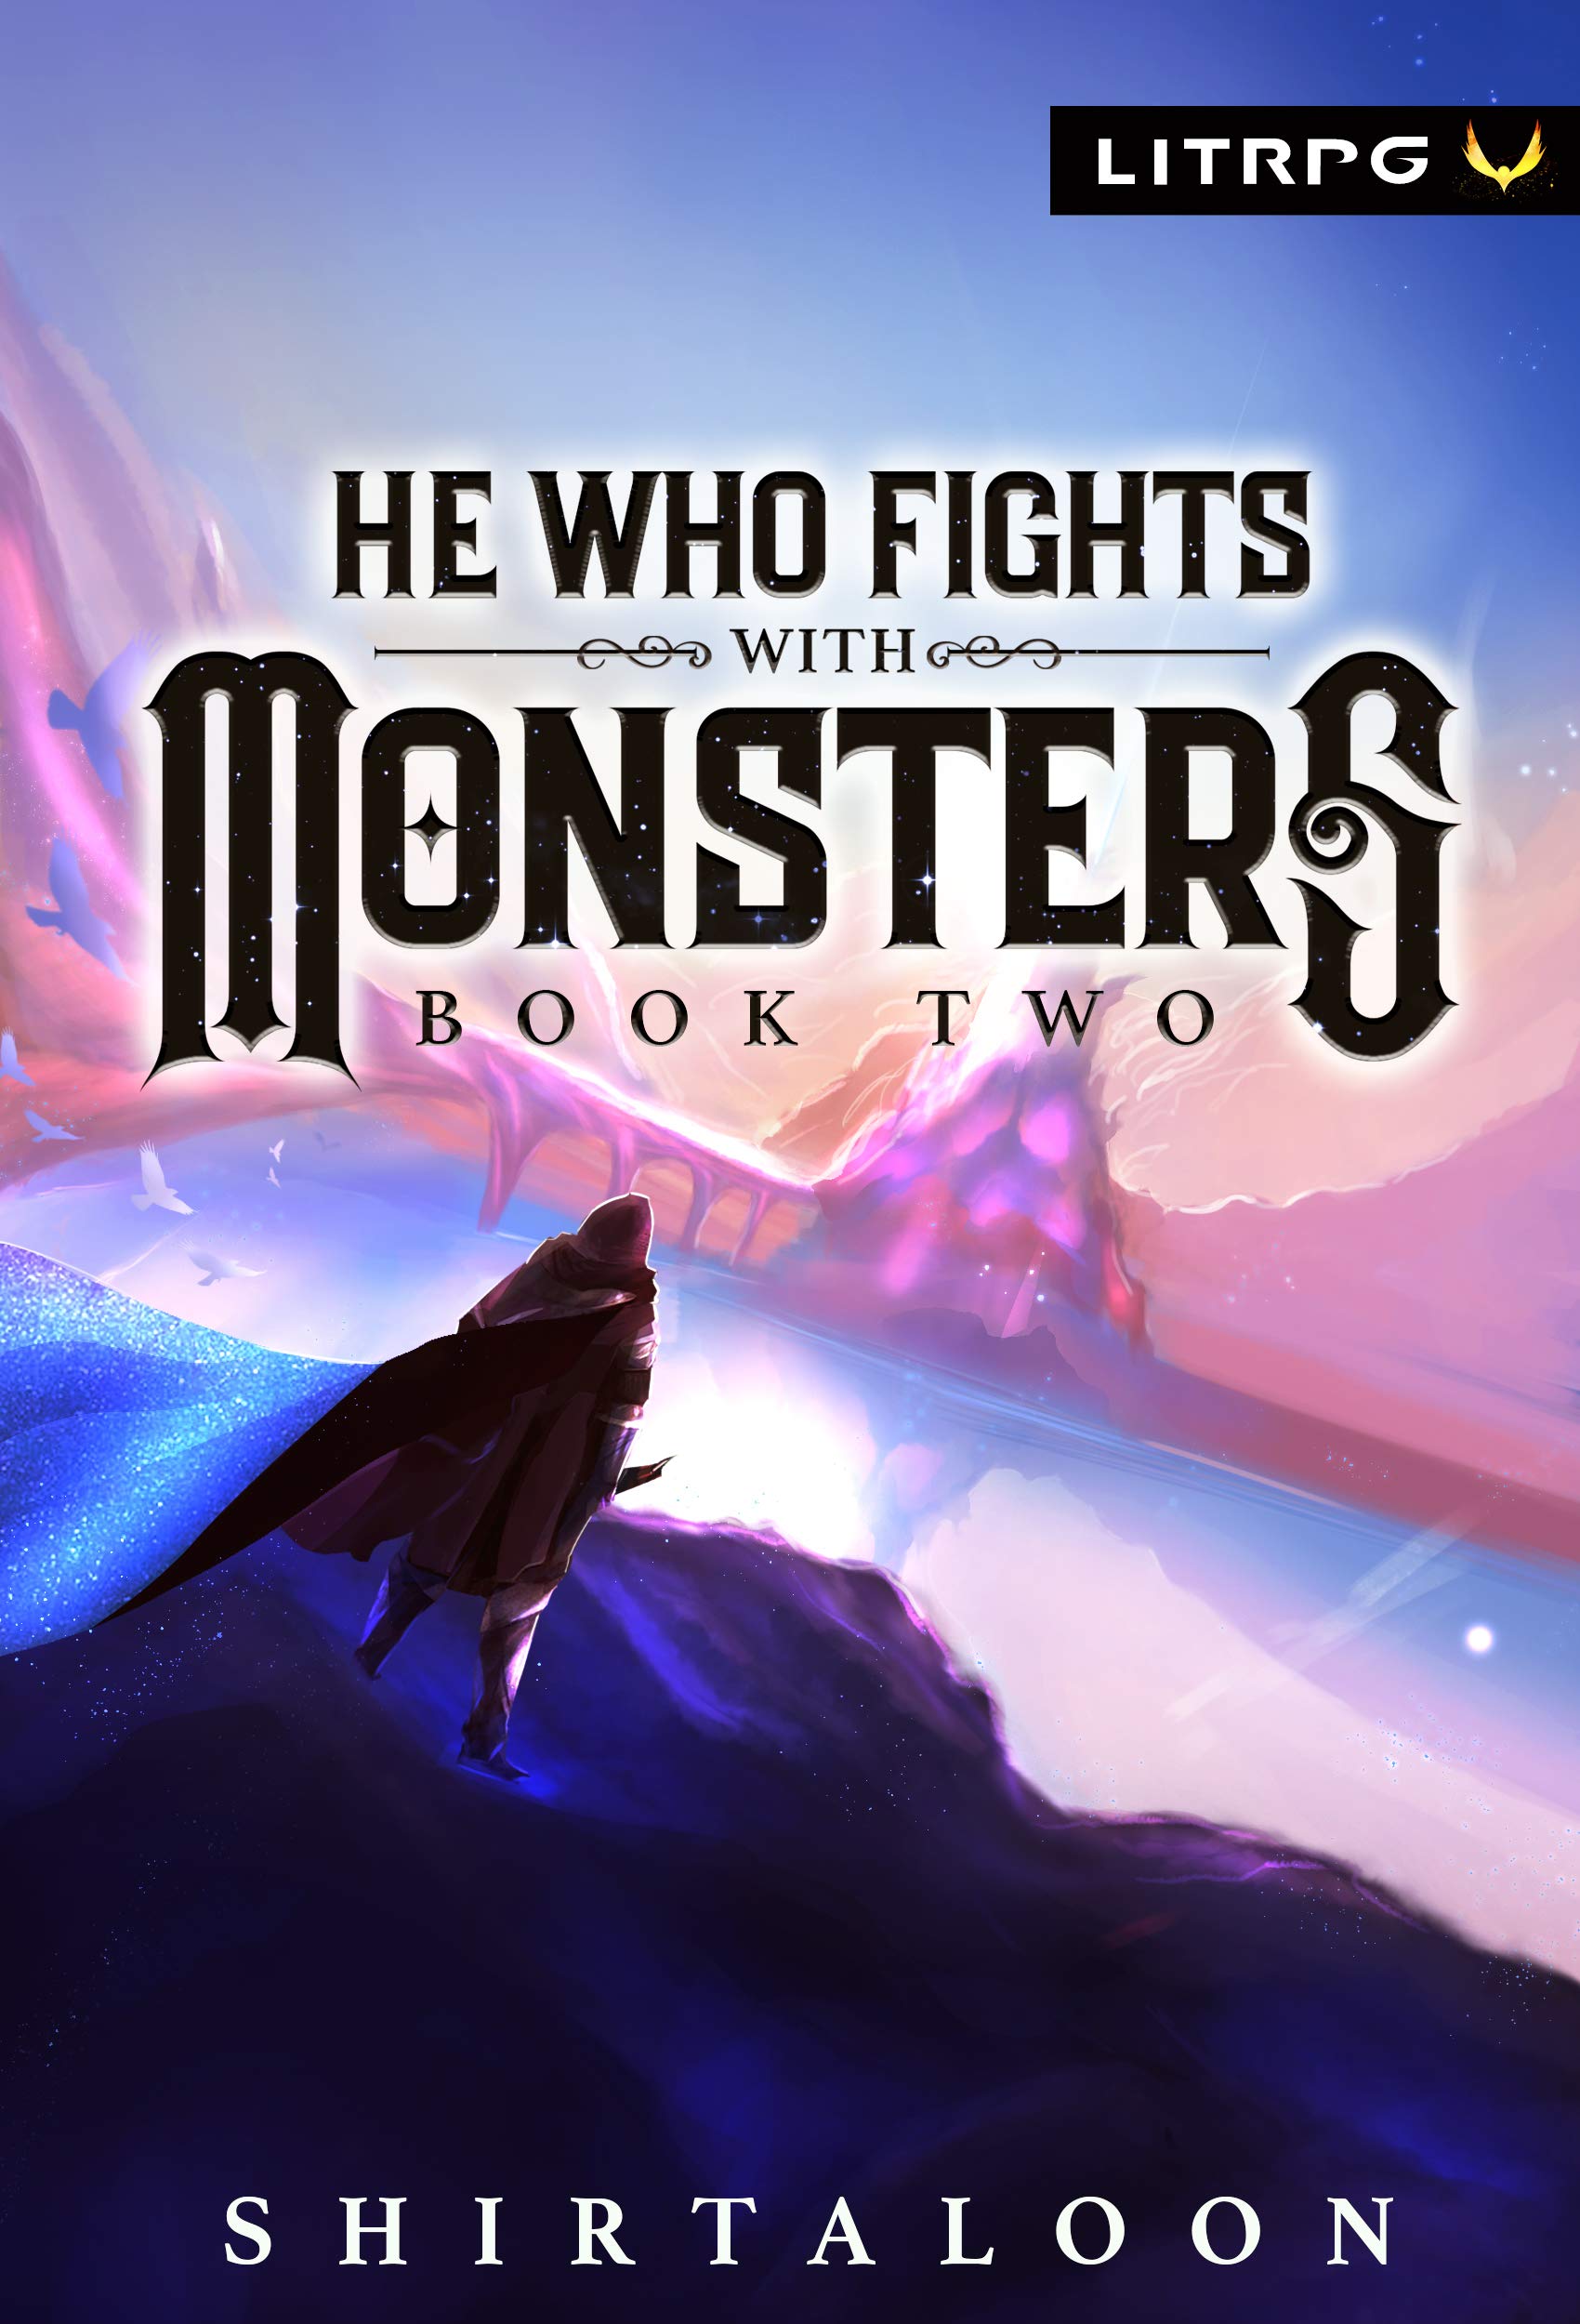 Shirtaloon: He Who Fights with Monsters 2